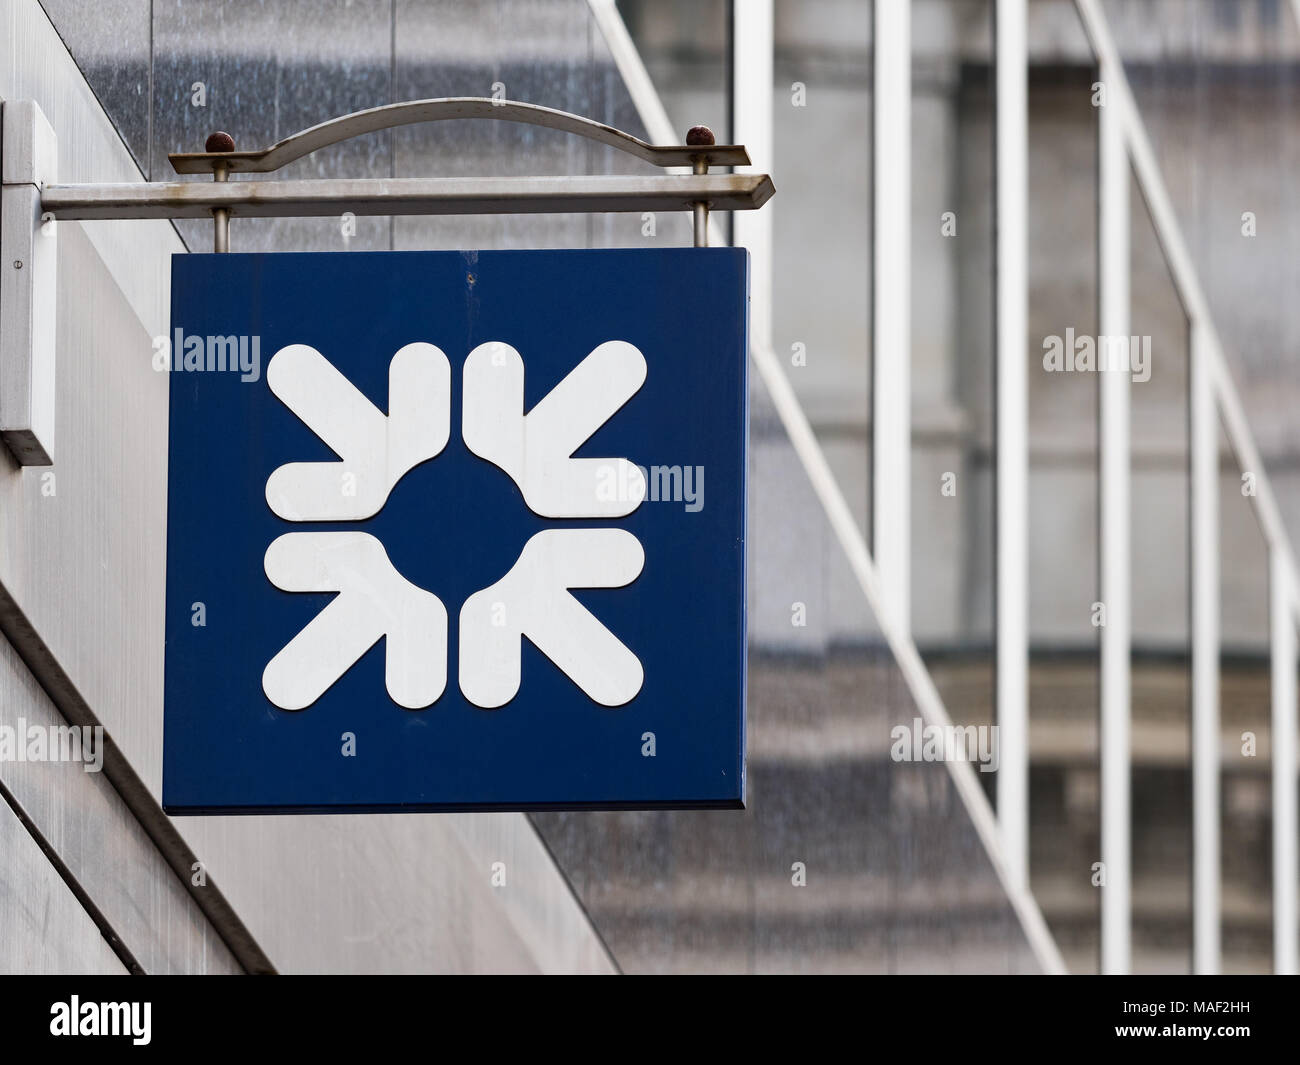 RBS Royal Bank of Scotland sign on a bank building in London's Square Mile Financial District Stock Photo